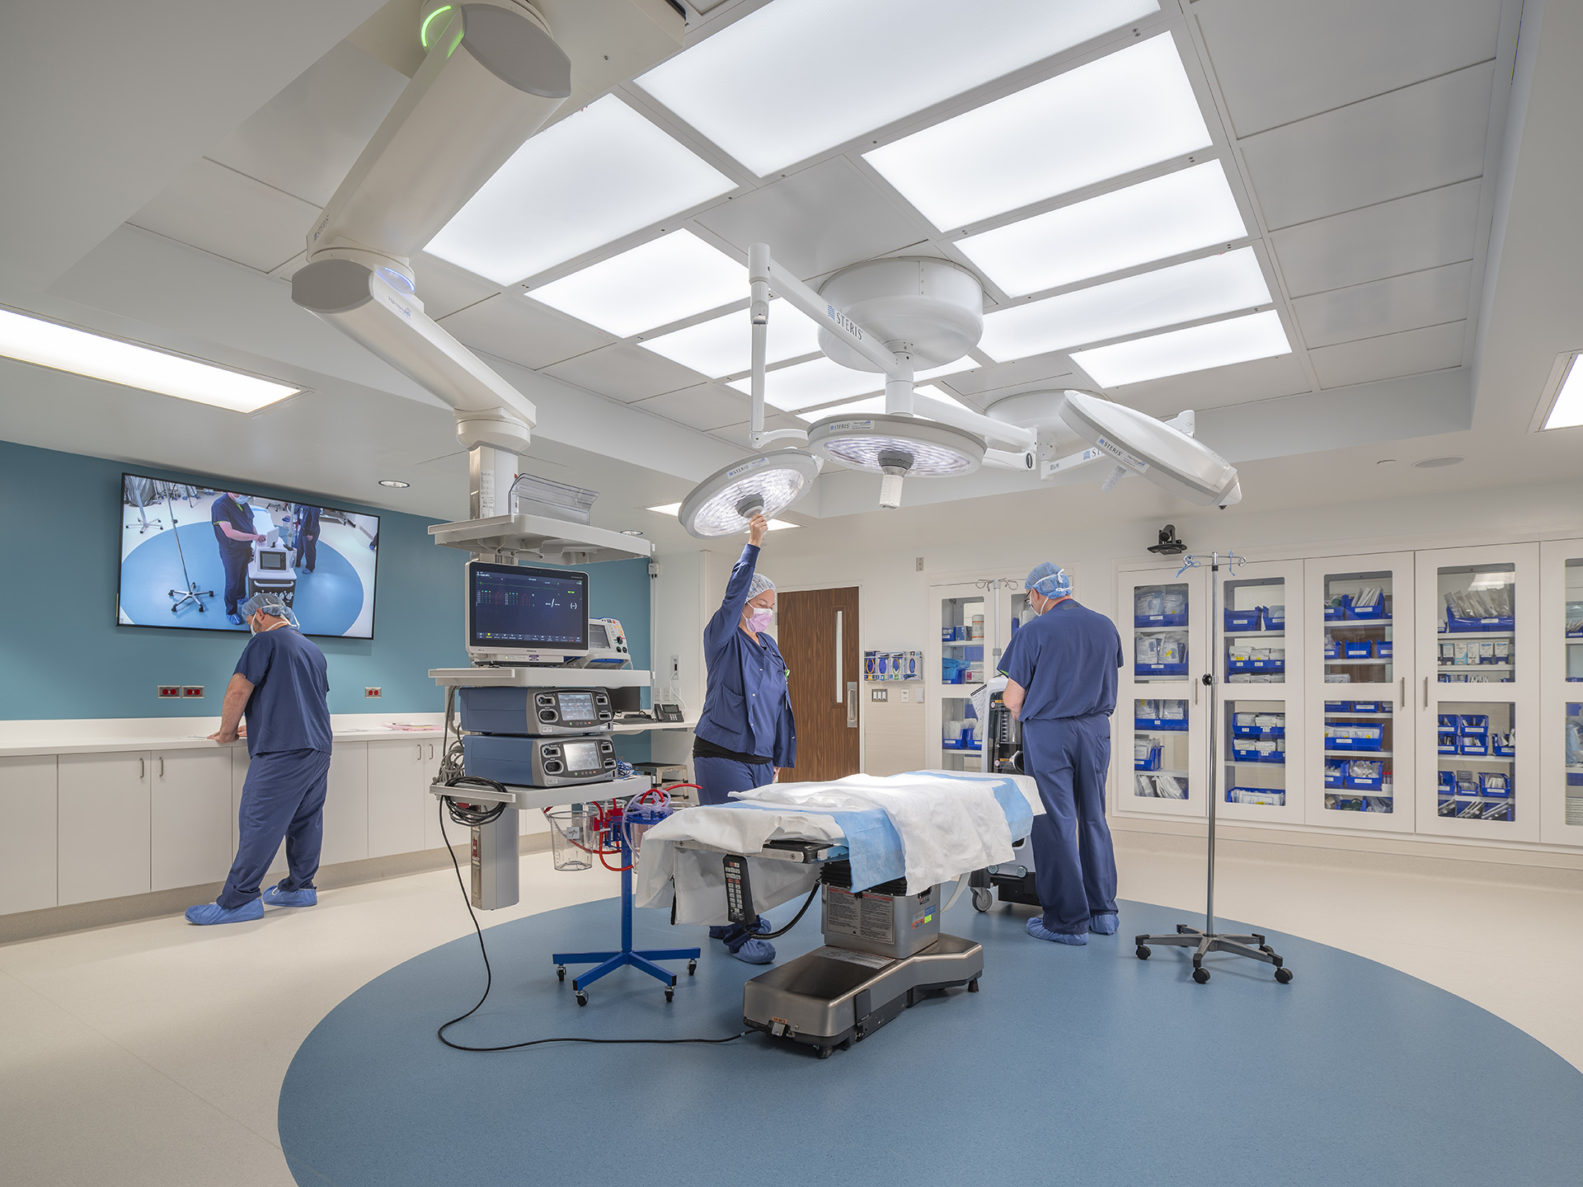 McCownGordon's healthcare team recently completed construction at Midwest Transplant Network